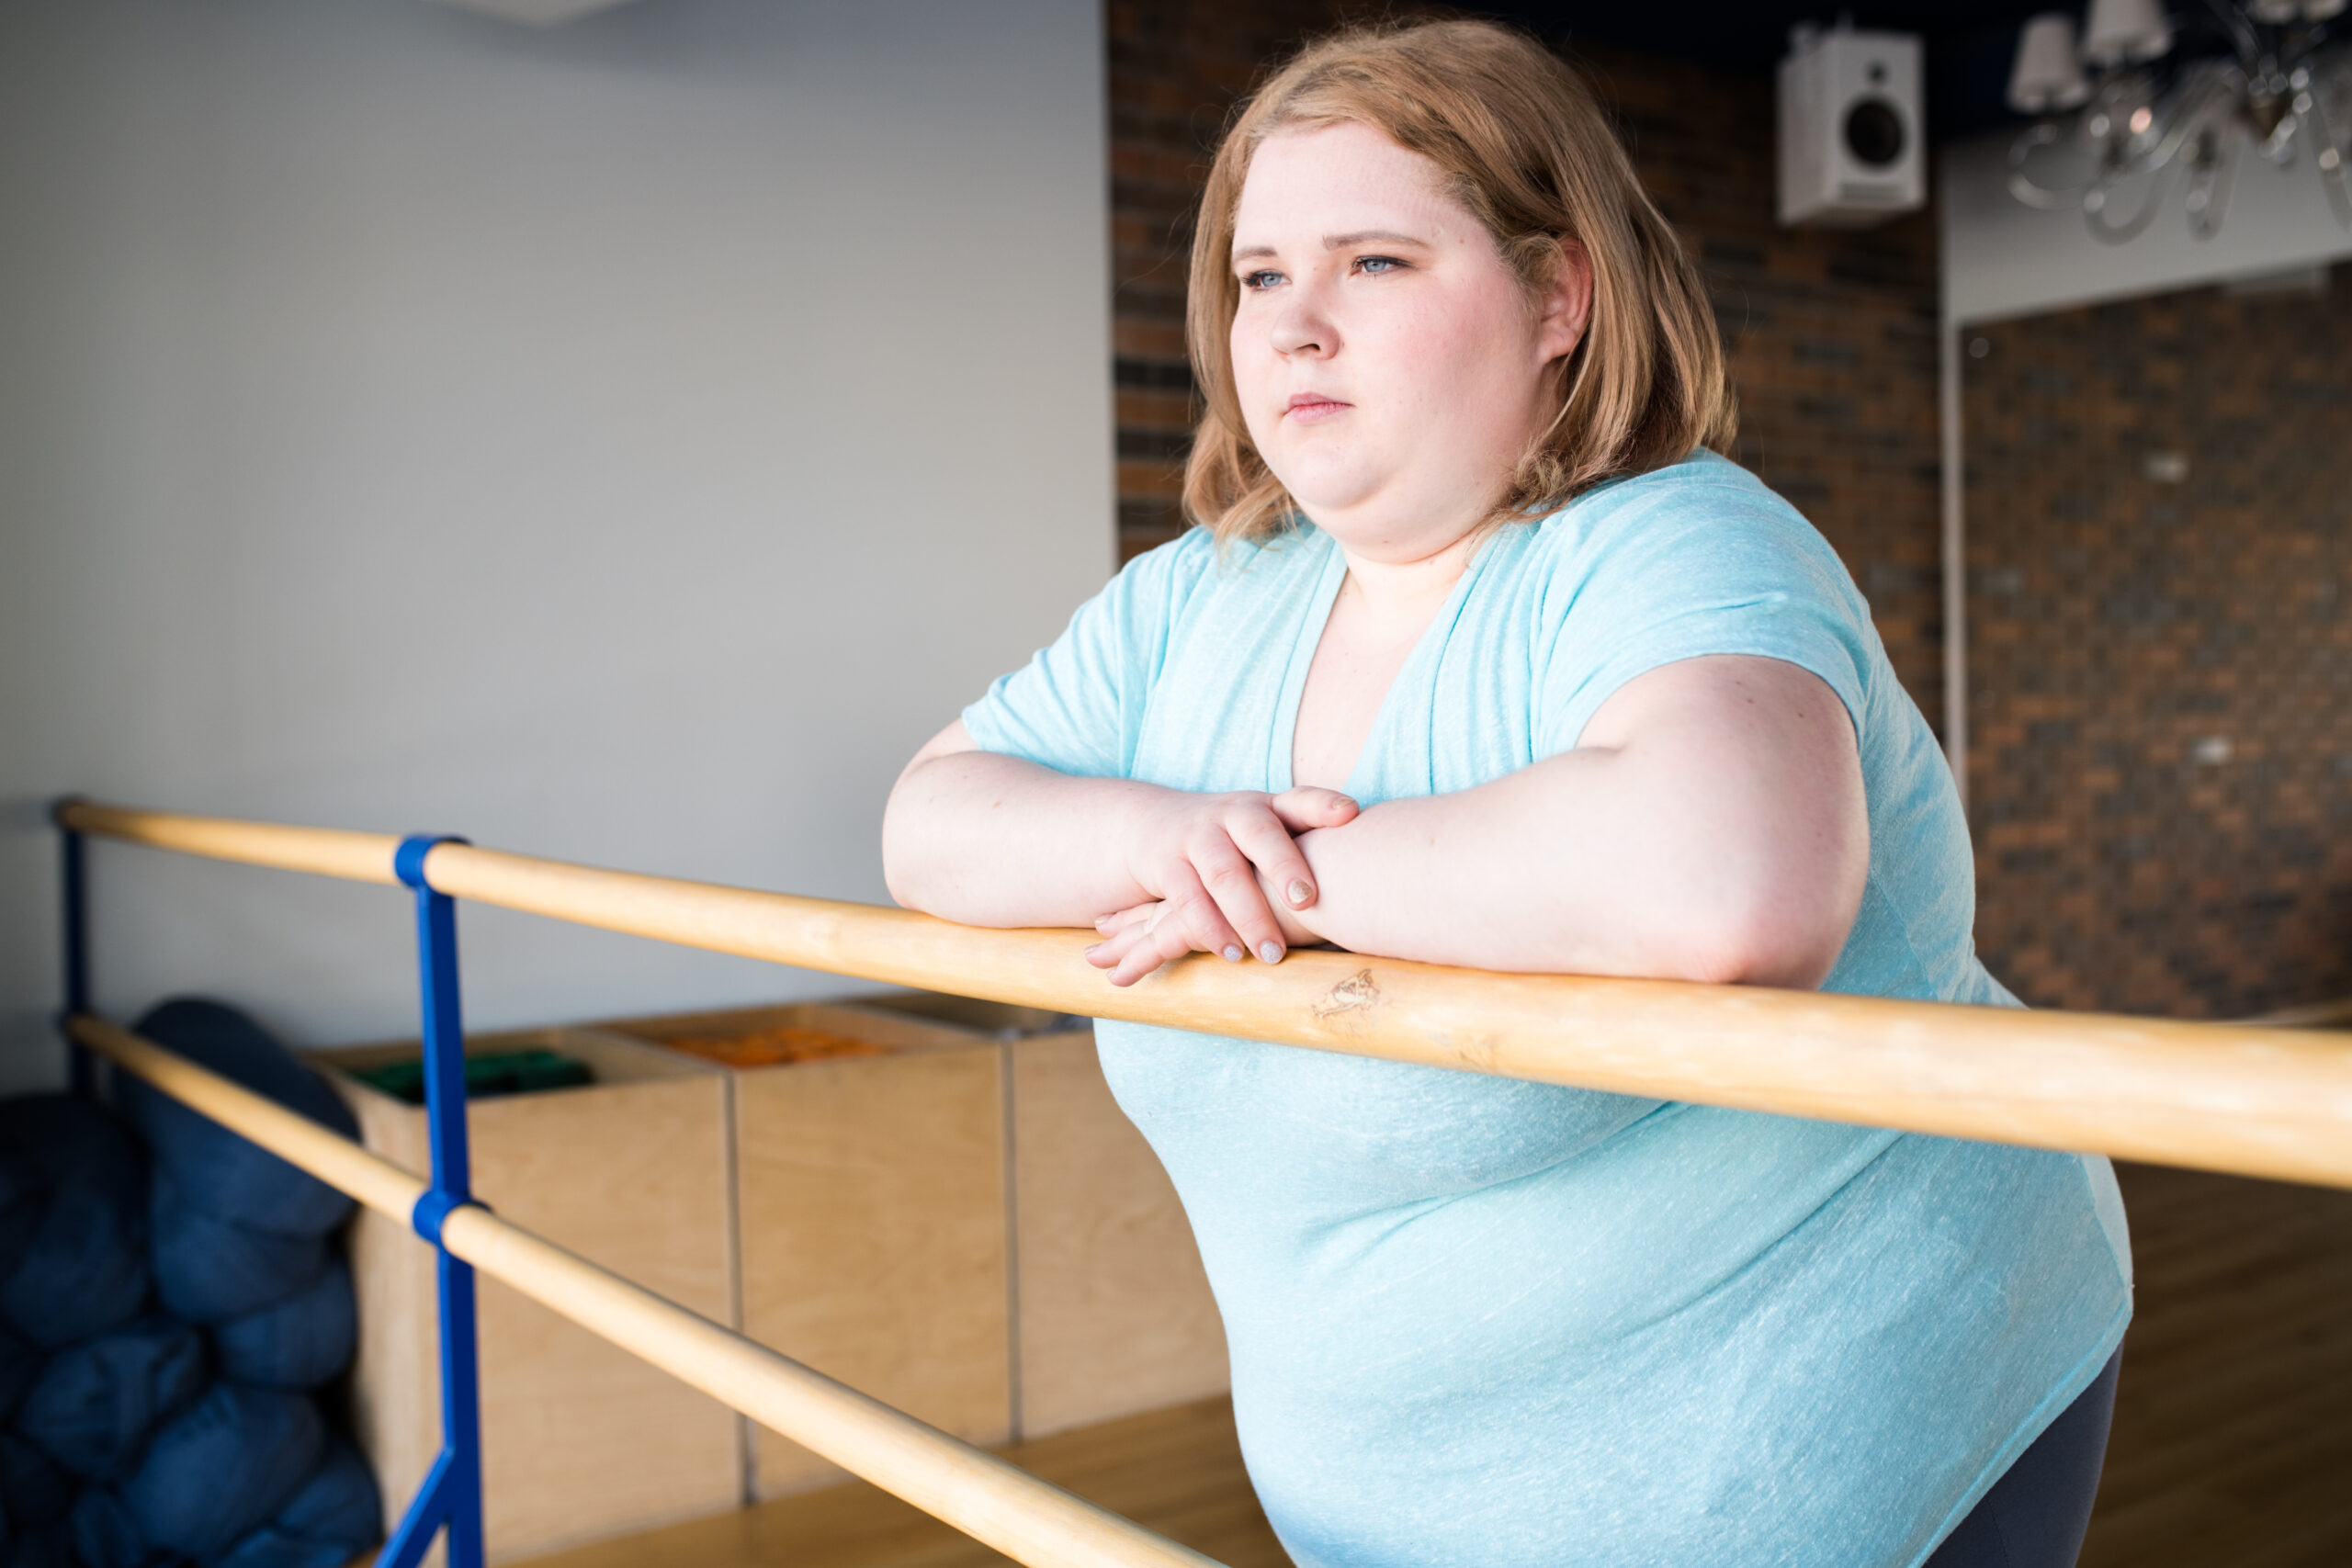 Obese person thinking while leaning against a wooden handrail.